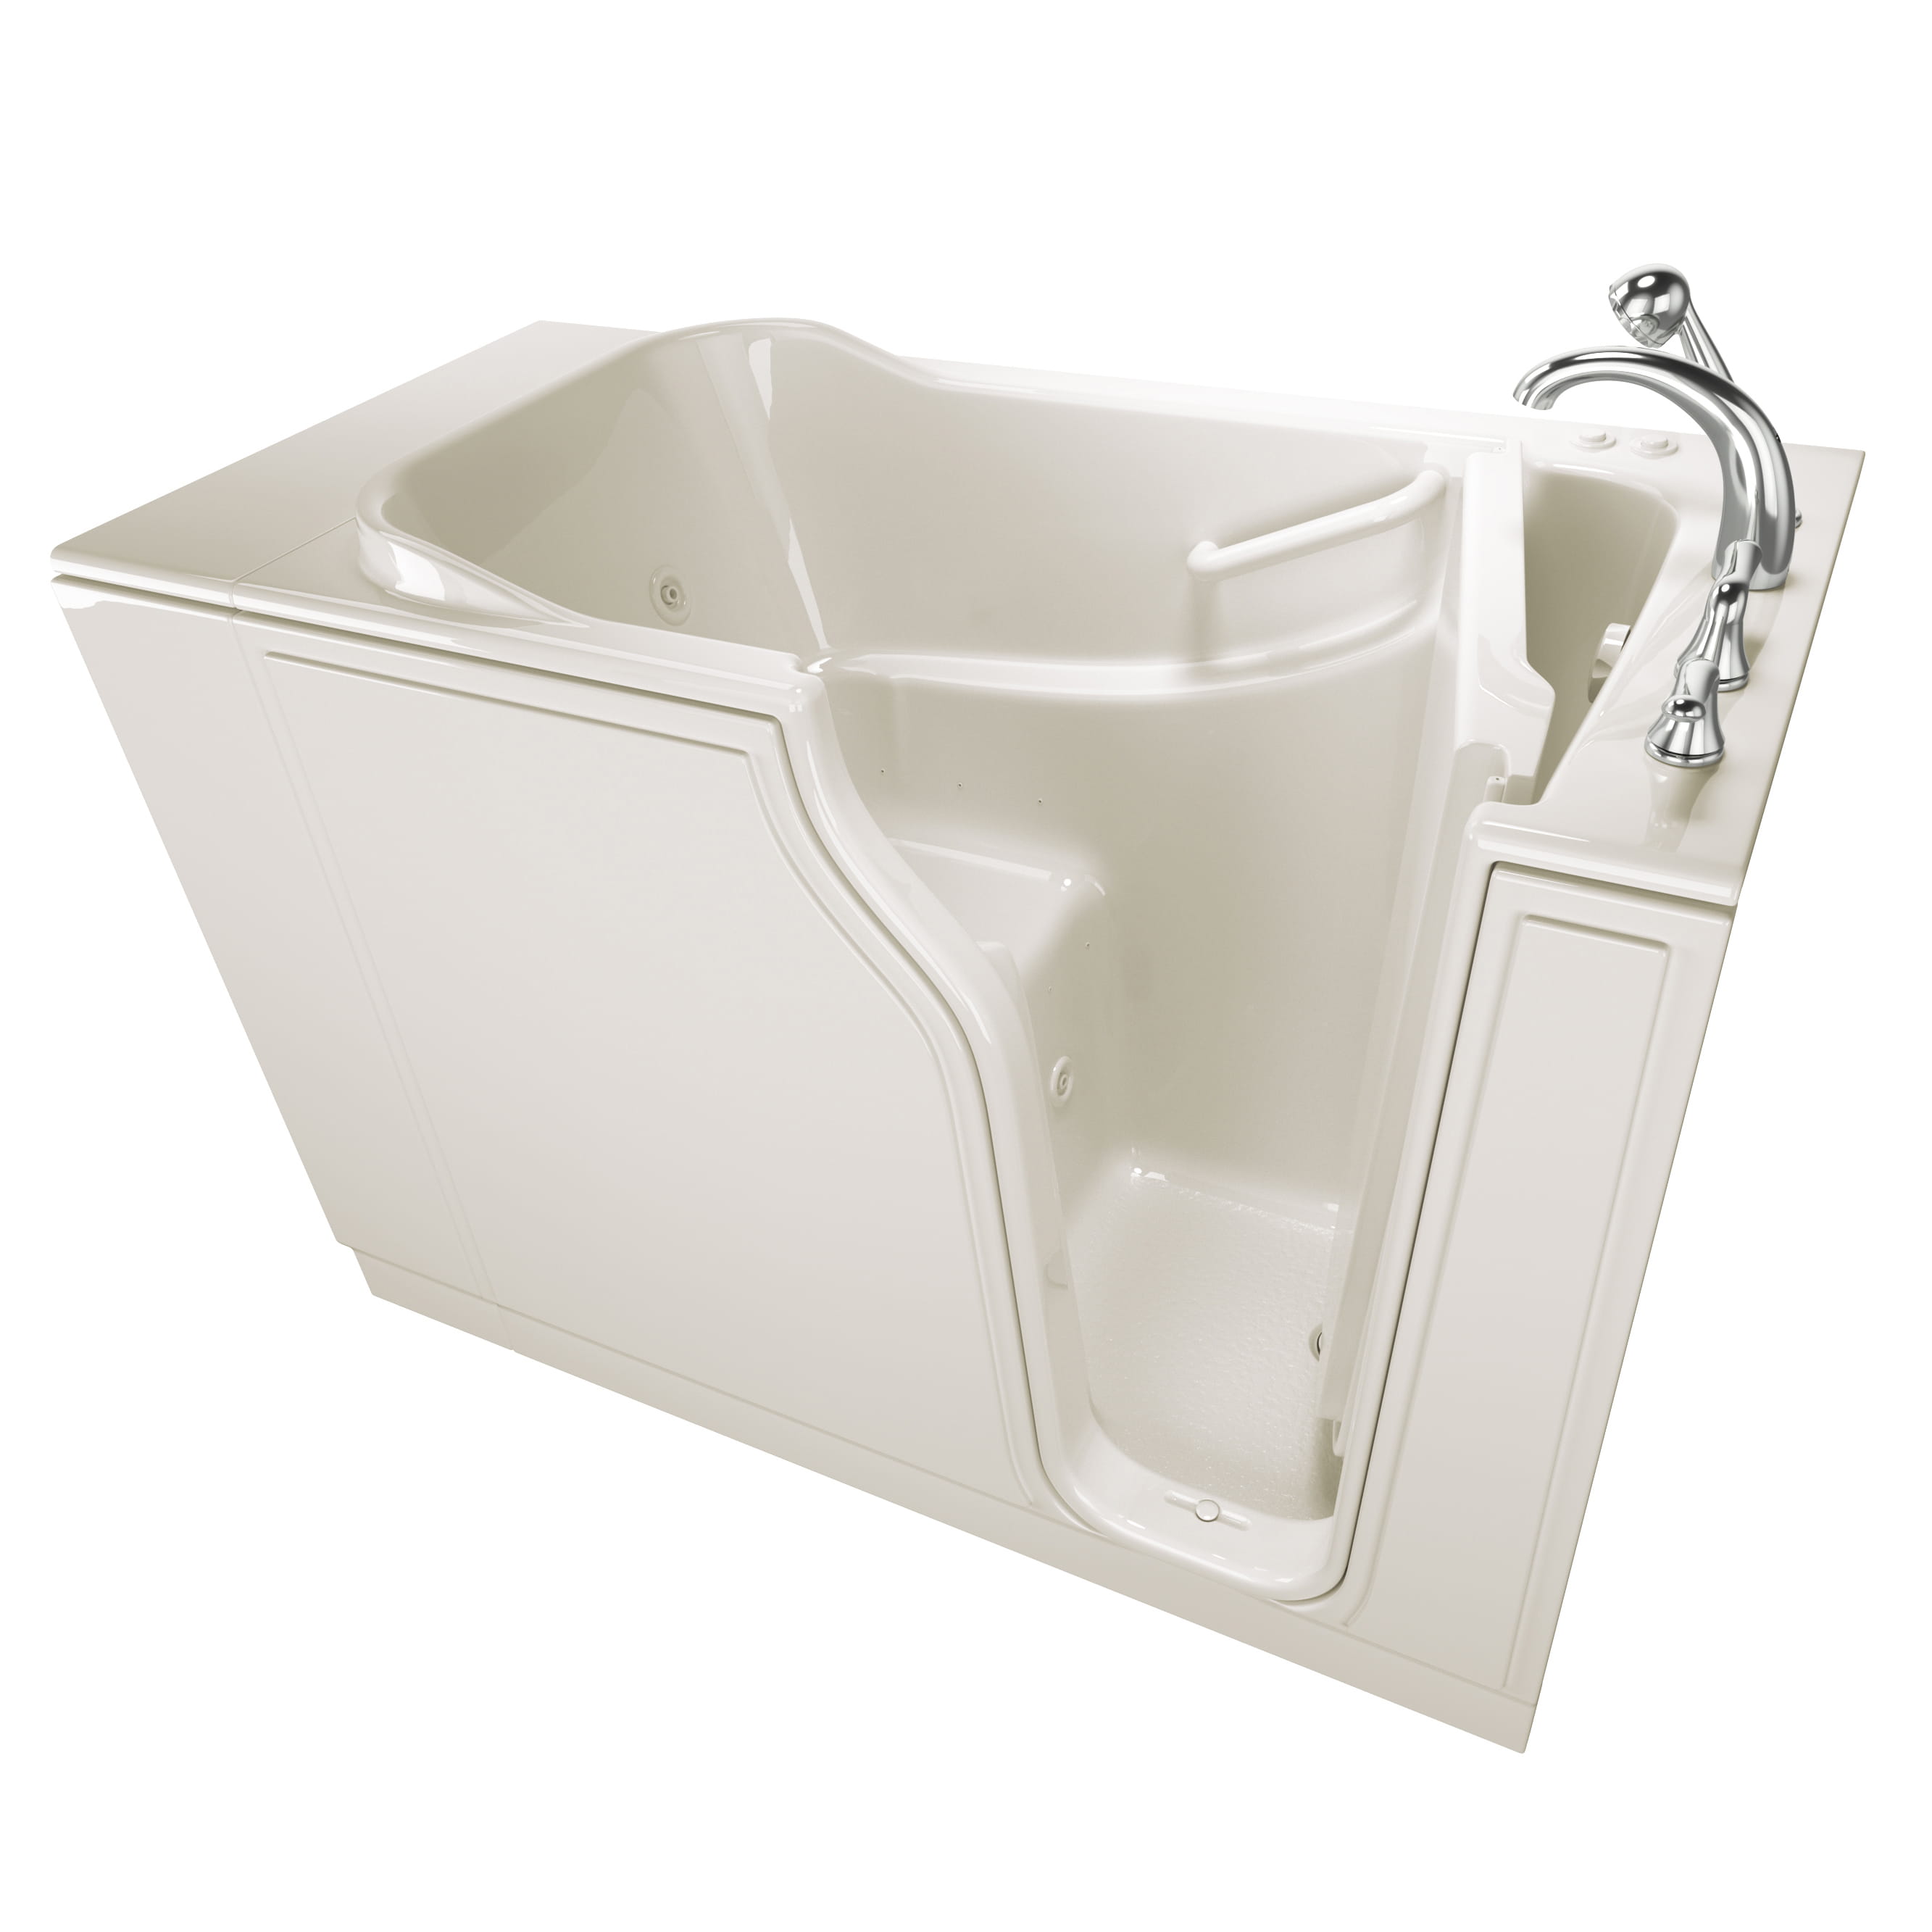 Gelcoat Entry Series 52 x 30-Inch Walk-In Tub With Combination Air Spa and Whirlpool Systems – Right-Hand Drain With Faucet